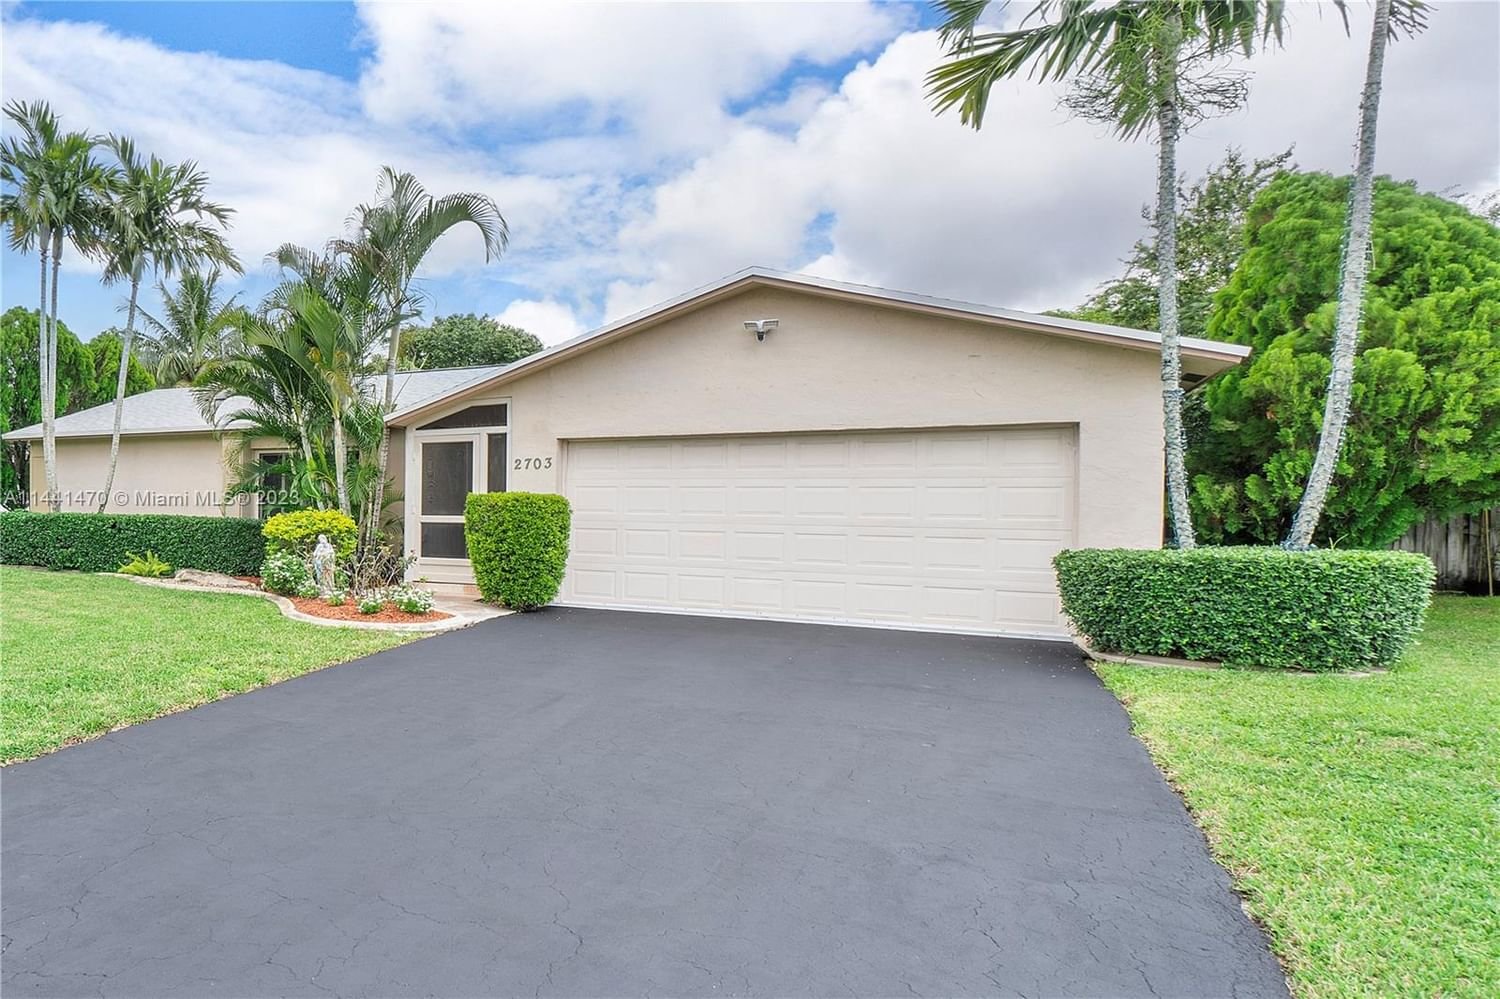 Real estate property located at 2703 98th Ln, Broward County, Coral Springs, FL